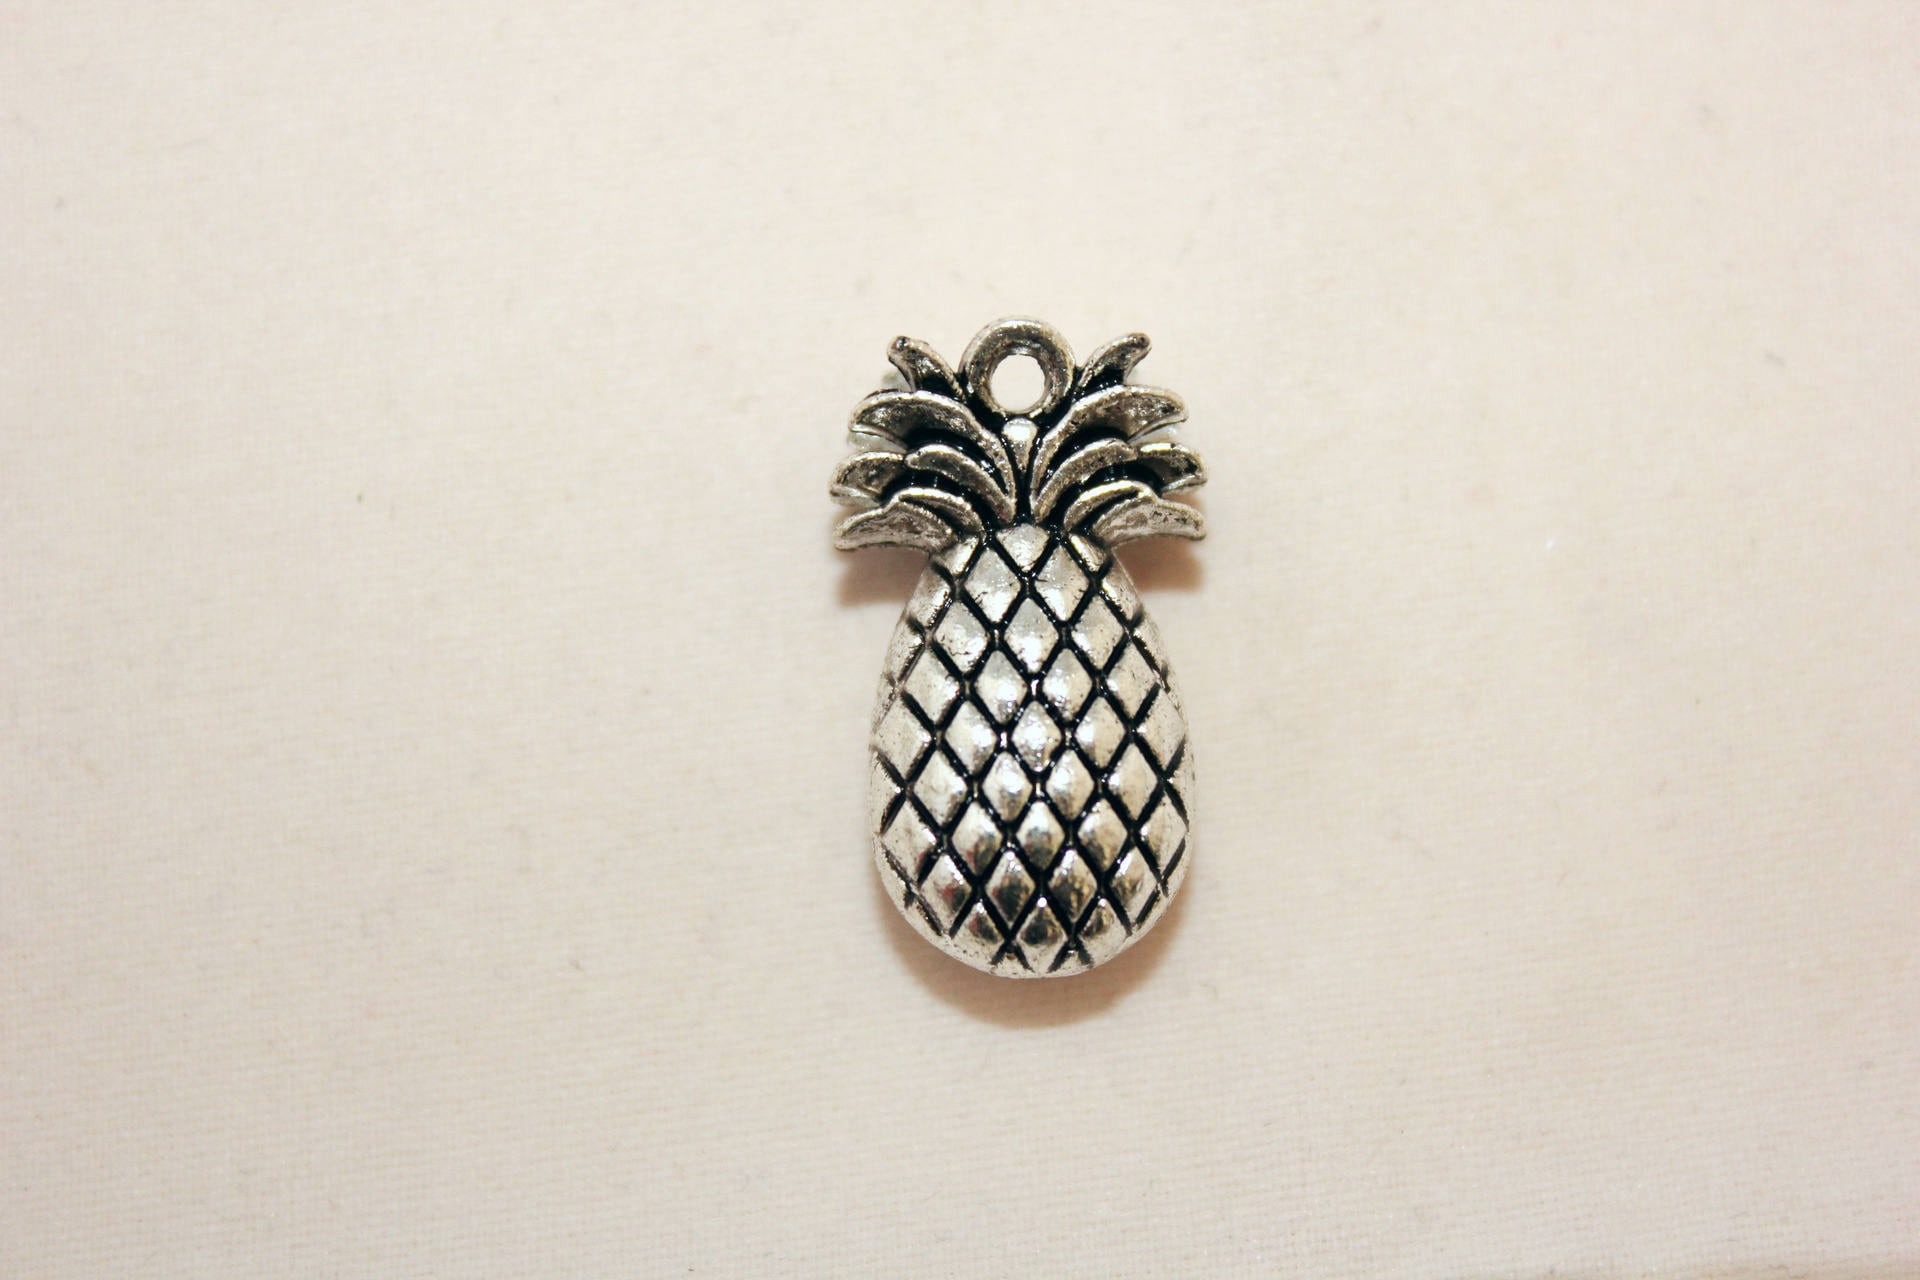 15PCS Silver Alloy Yellow Pineapple 25x14mm Charms Pendant DIY Making Findings 